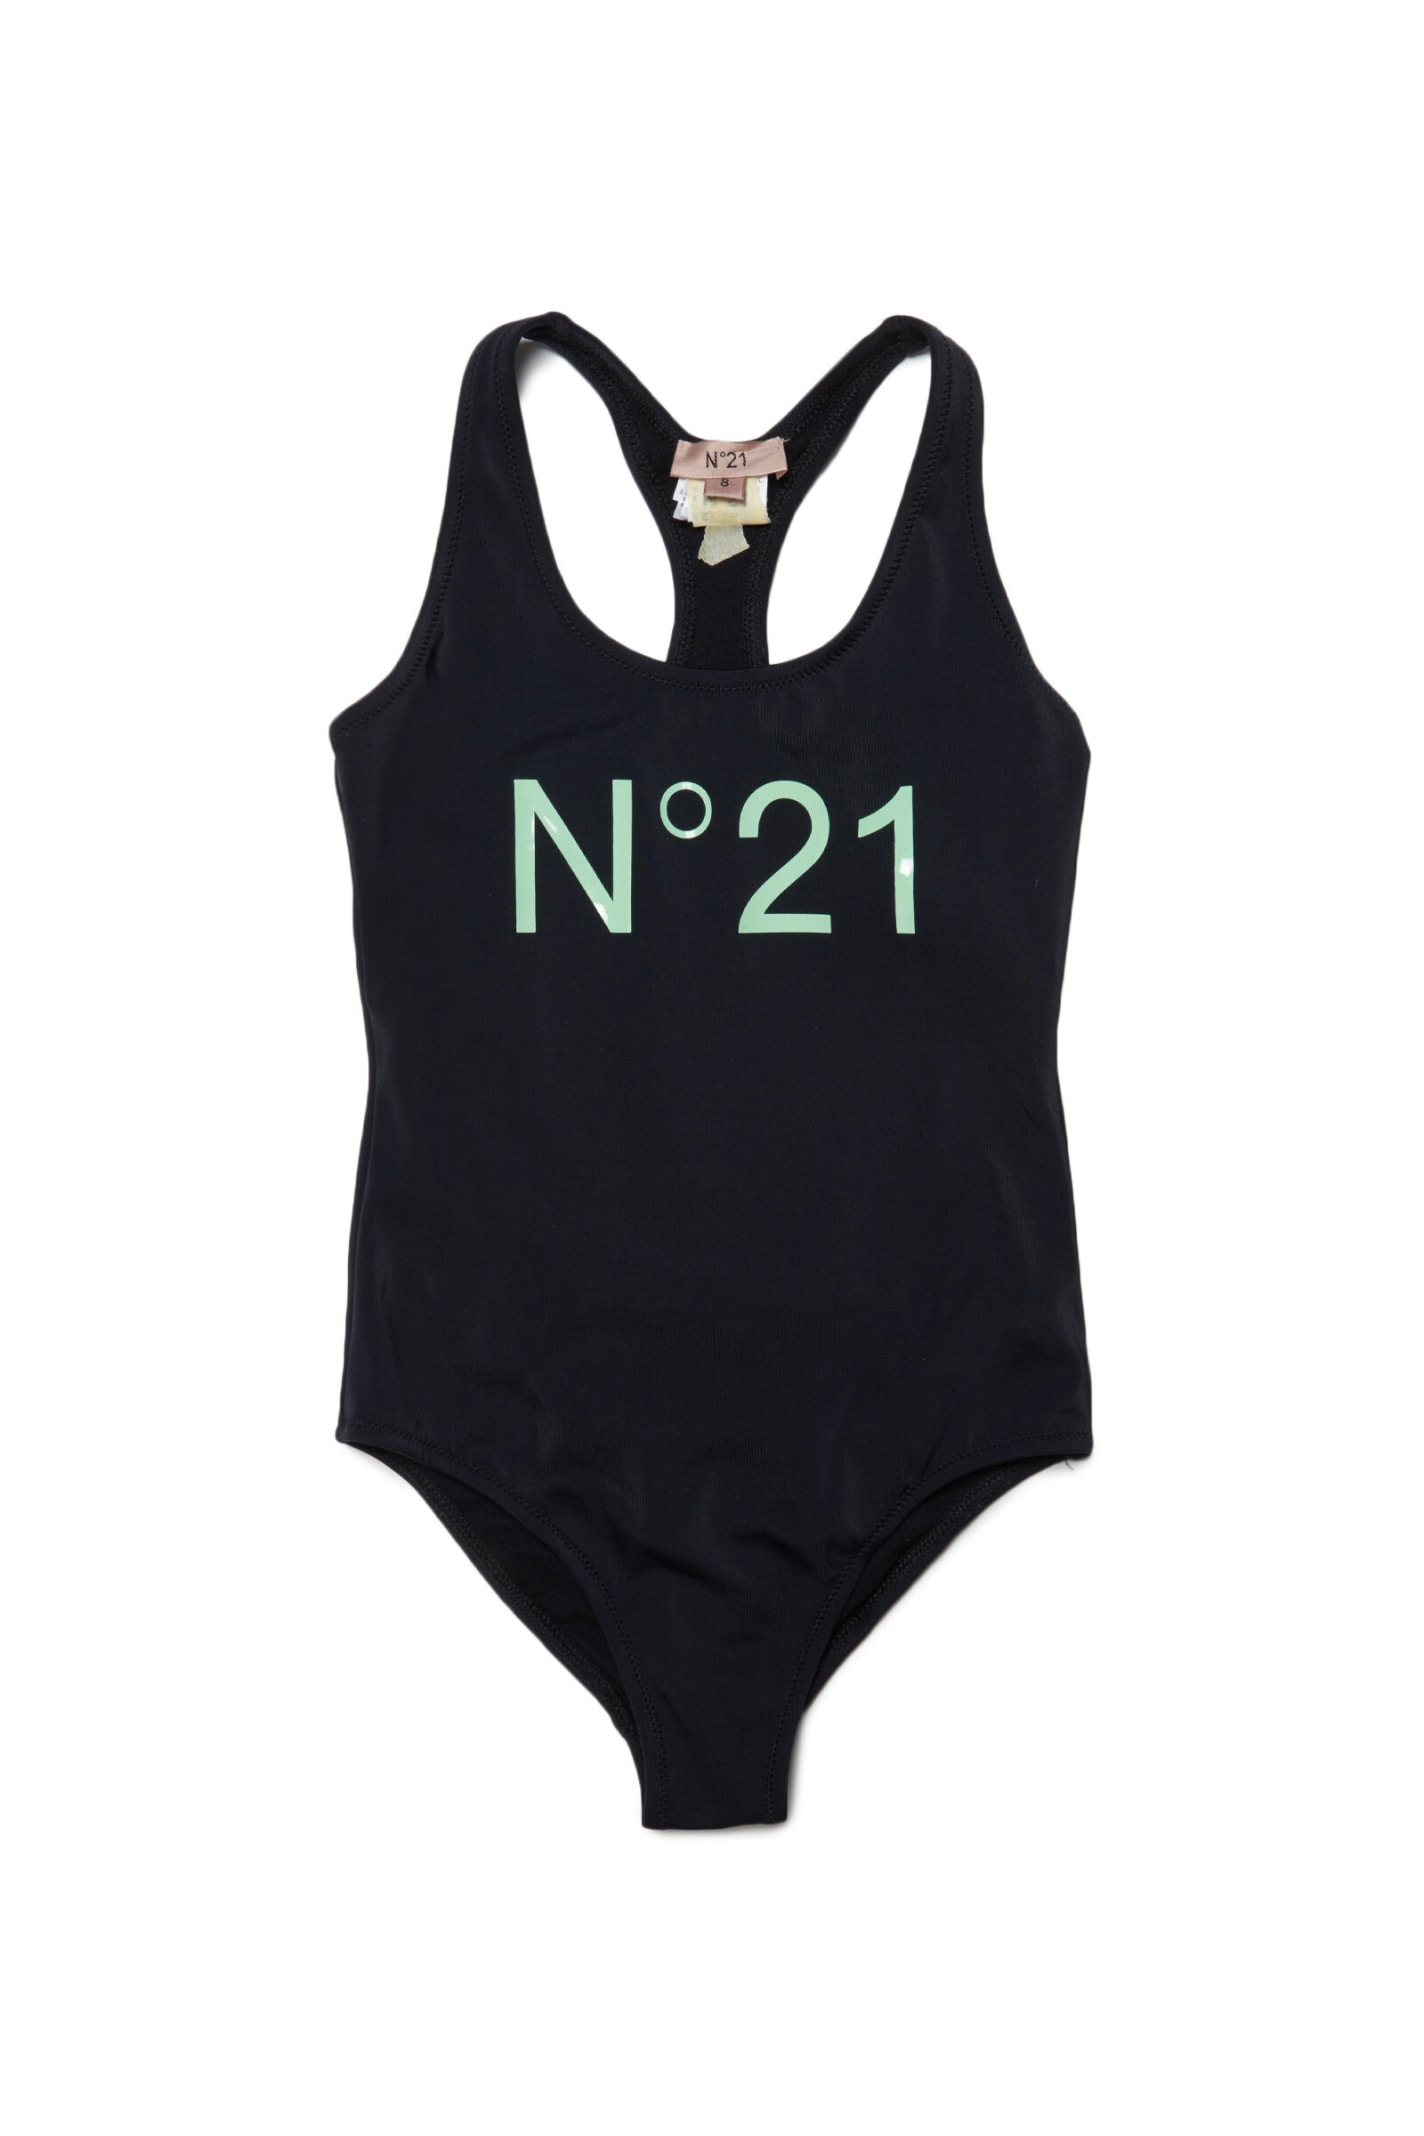 N°21 N21M20F SWIMSUIT N°21 BLACK LYCRA ONE-PIECE SWIMMING COSTUME WITH LOGO